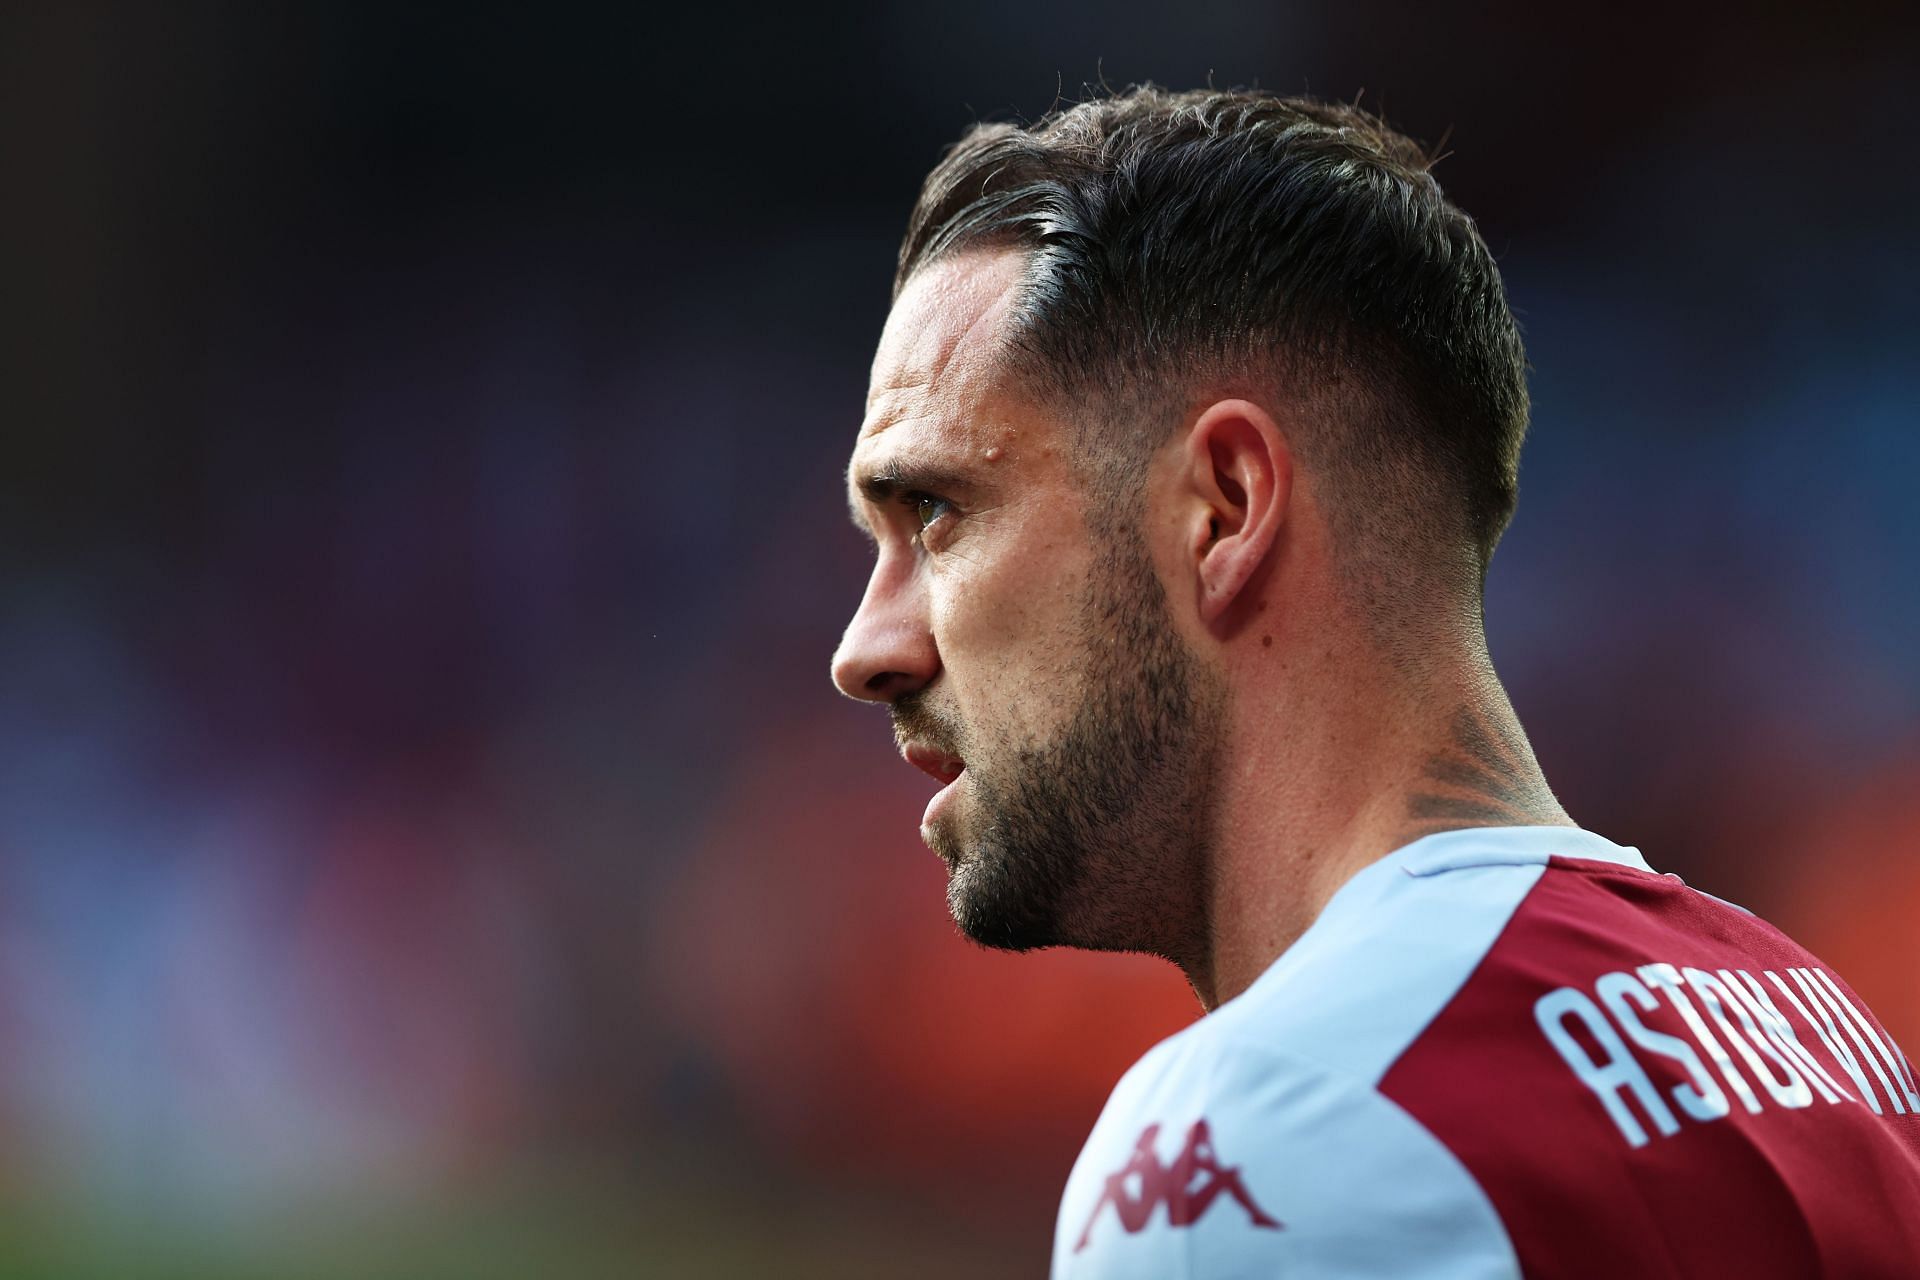 Aston Villa is open to selling Danny Ings this summer